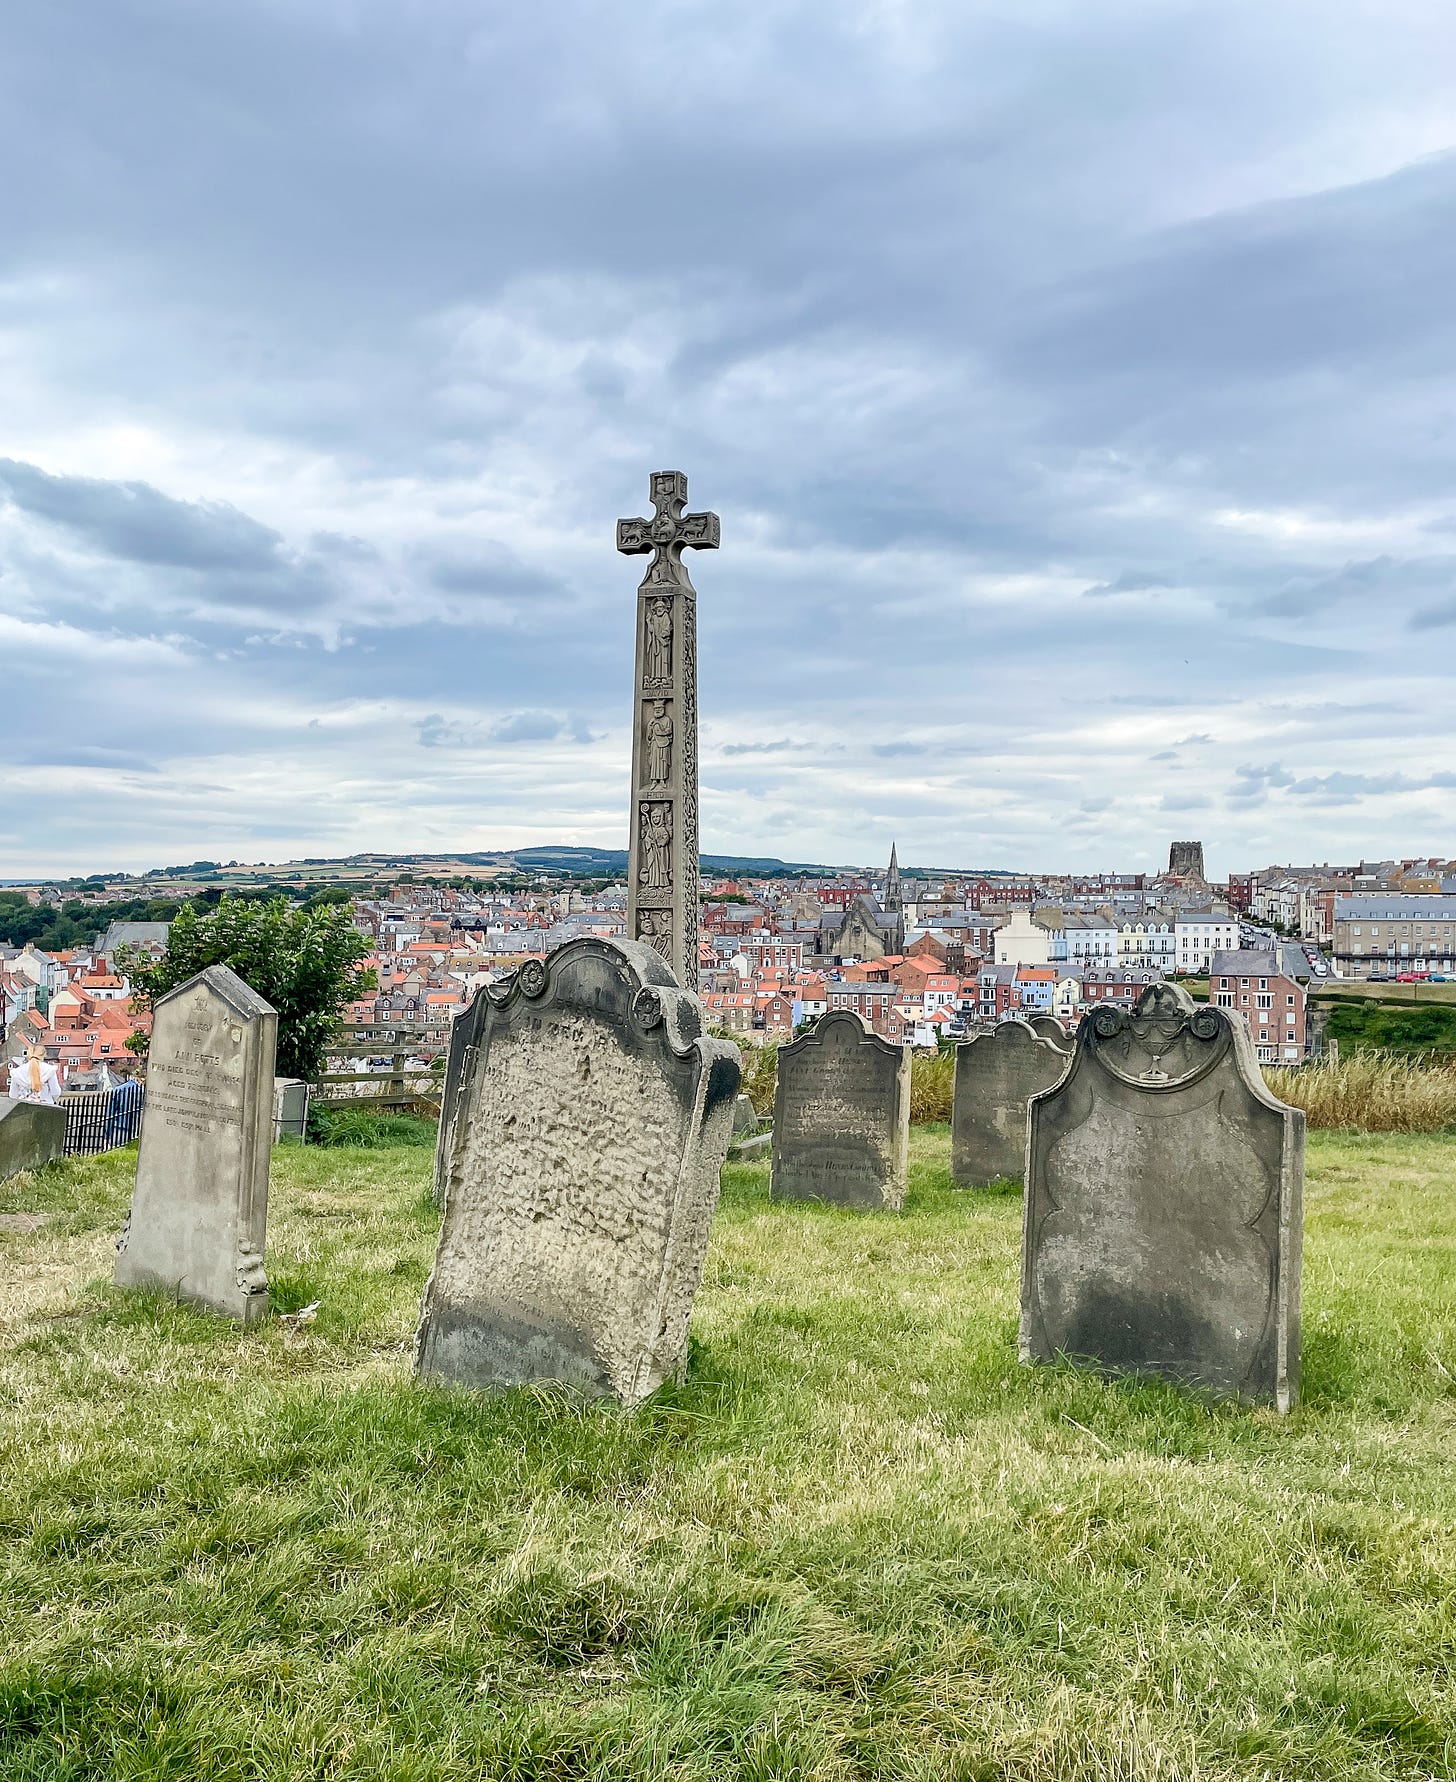 The Cemetery at Whitby, England